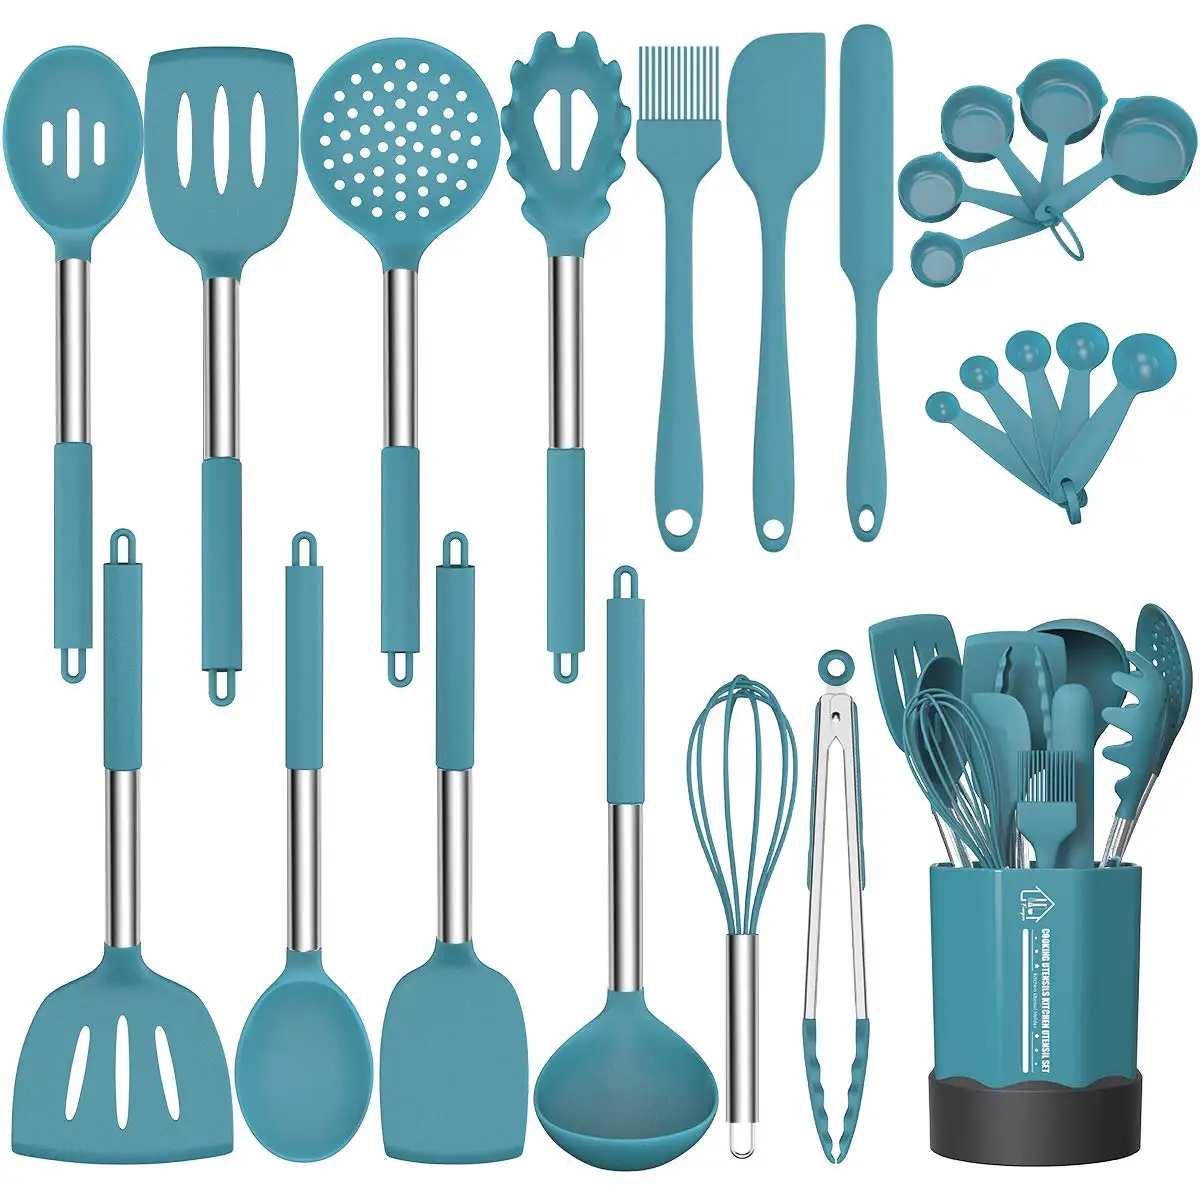 Heat Resistant Silicone Cooking Utensil Set 24 Piece Silicone Support For Spoon And Utensils